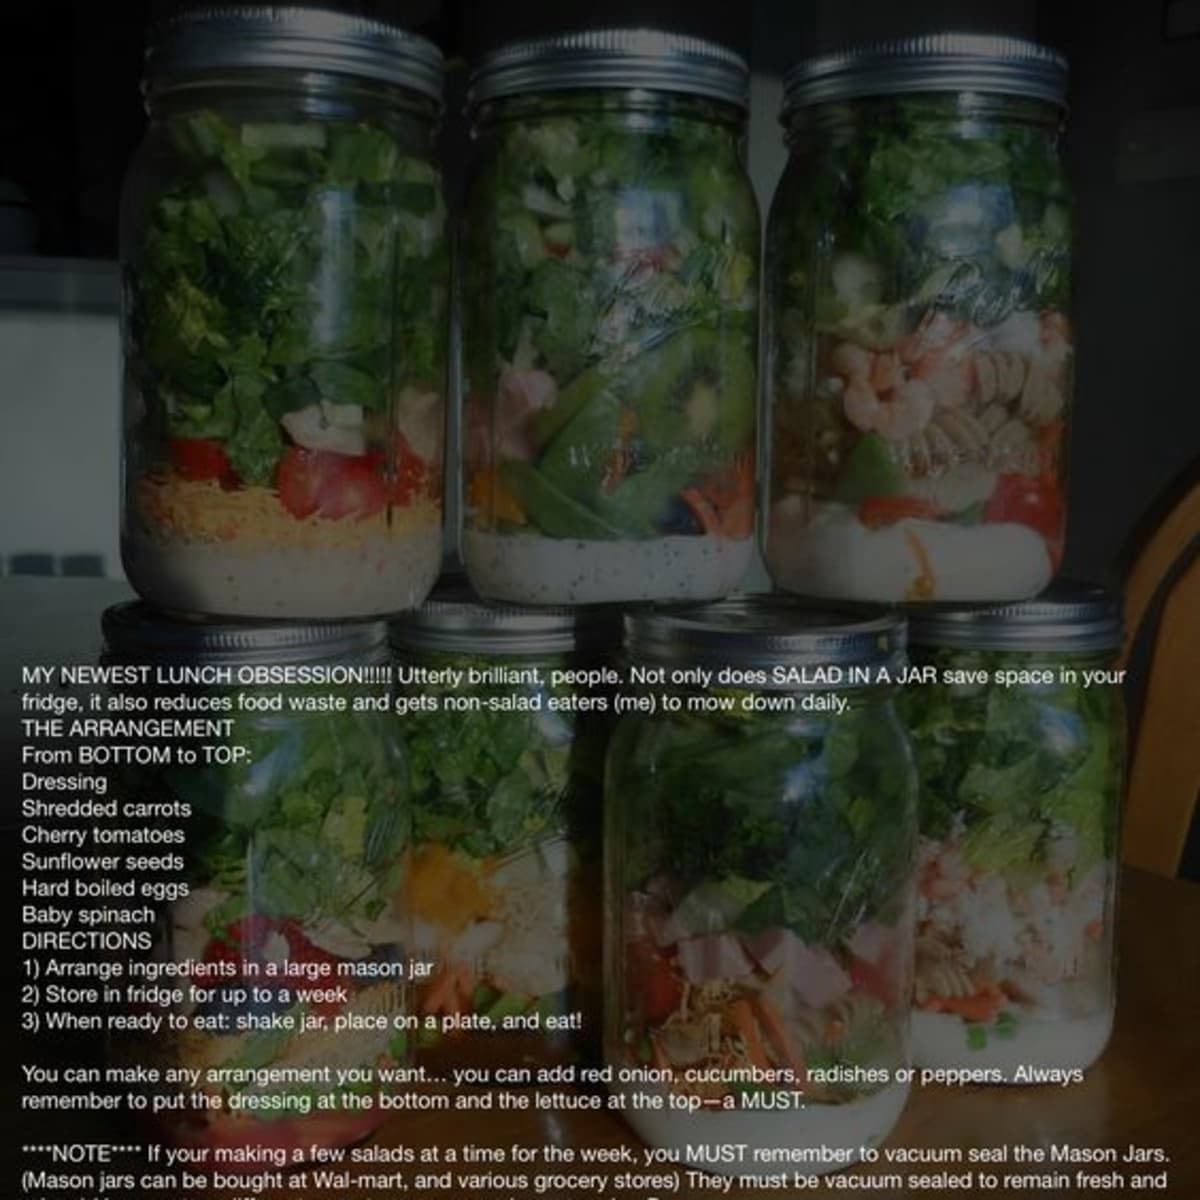 Mason jar meal: A complete meal in jars. Perfect meal prep or picnic idea!